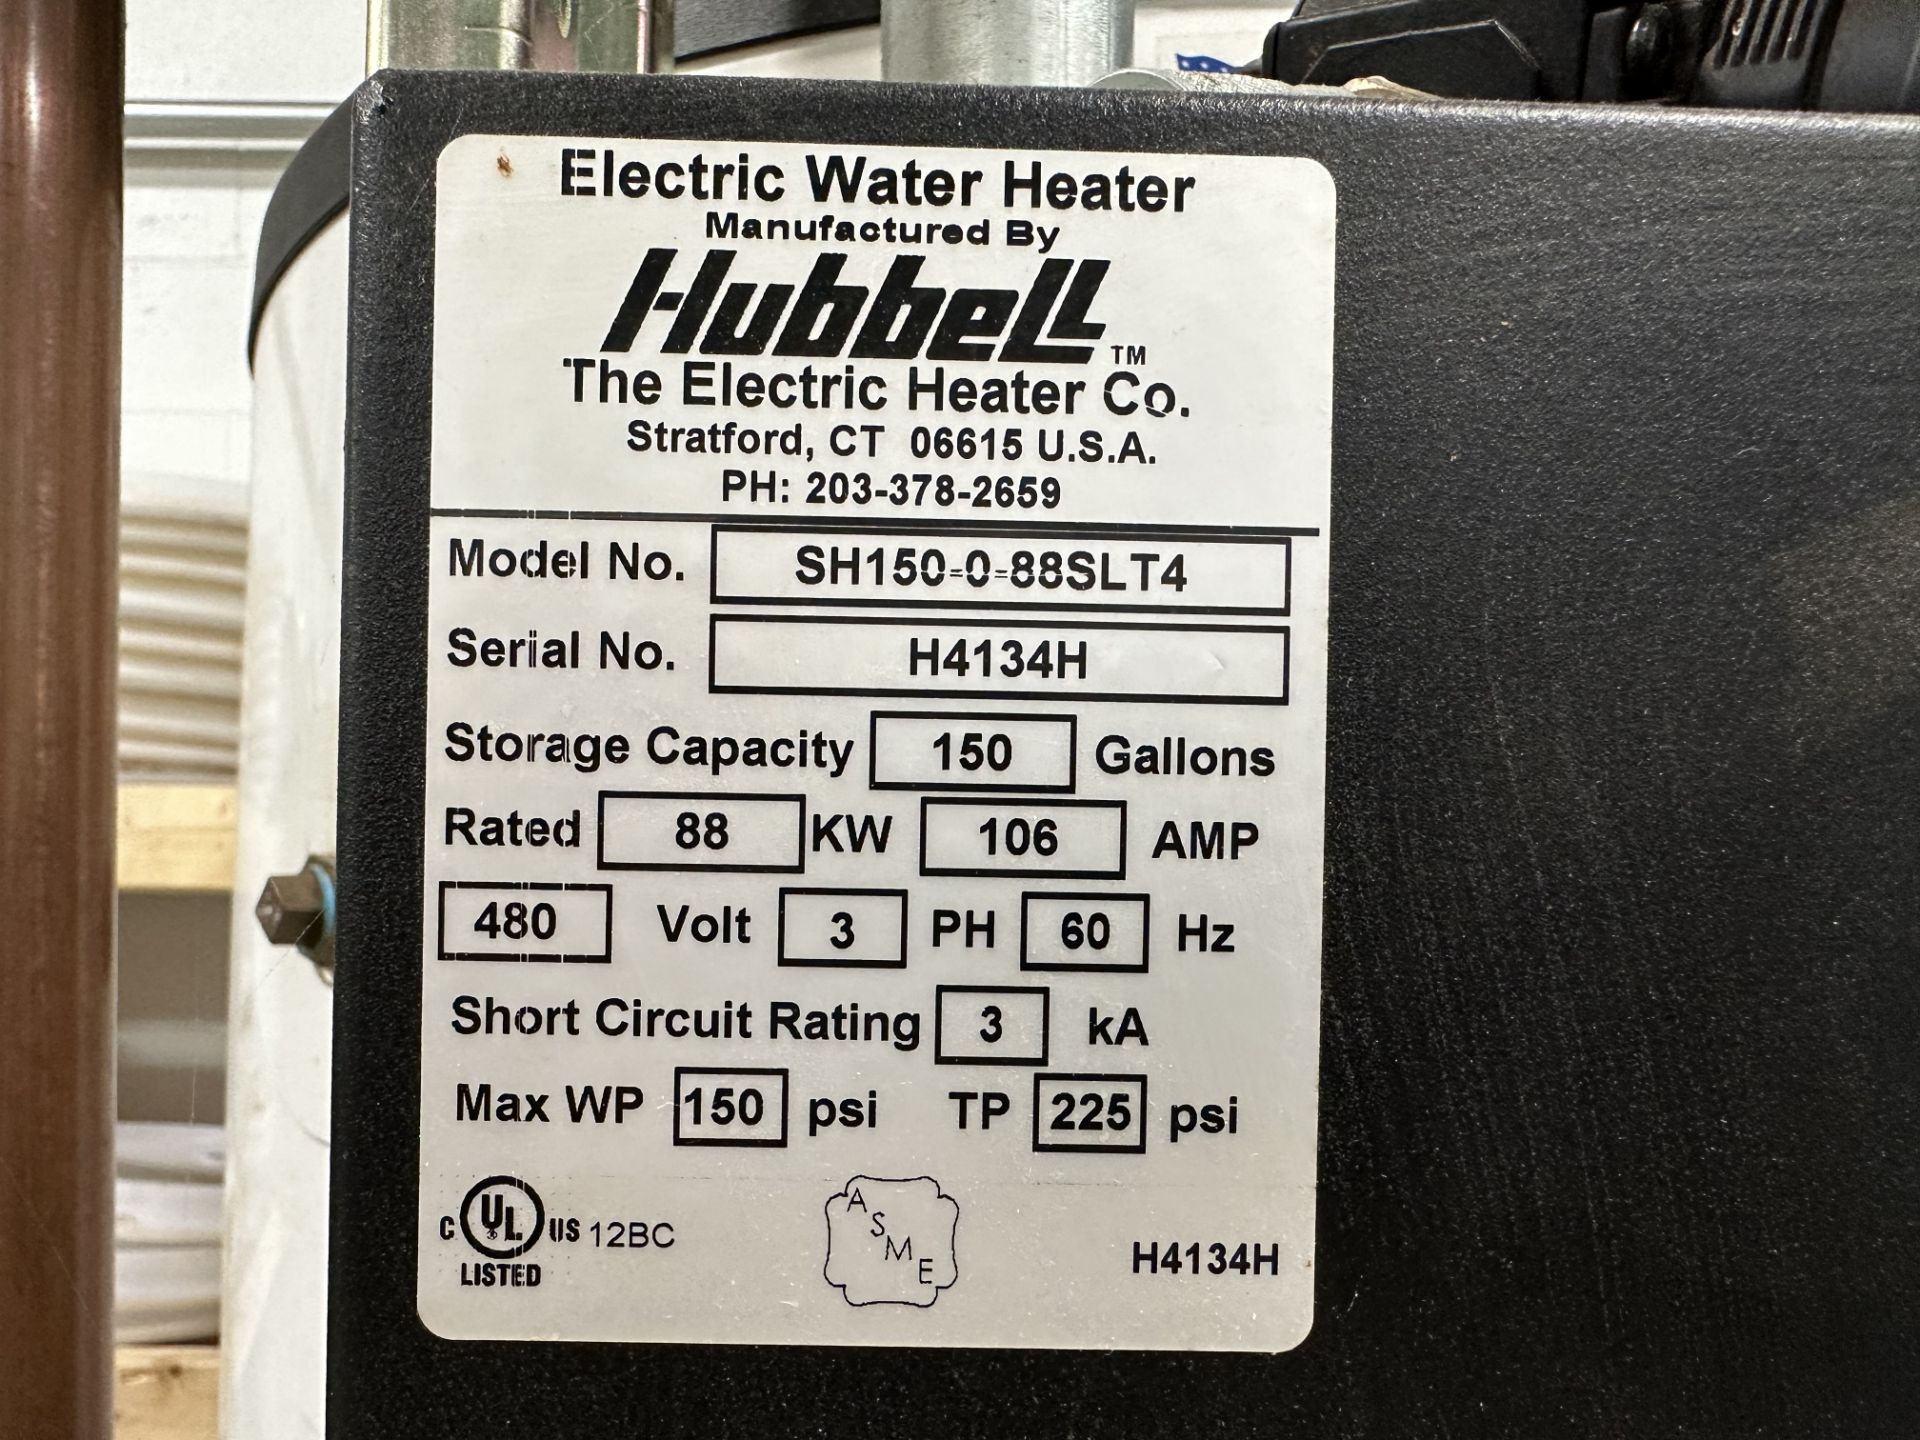 Hubbell #SH150-0-88SLT4, 150 Gallon Electric Water Heater, 3 Phase, 60hz, 280V - Image 2 of 3